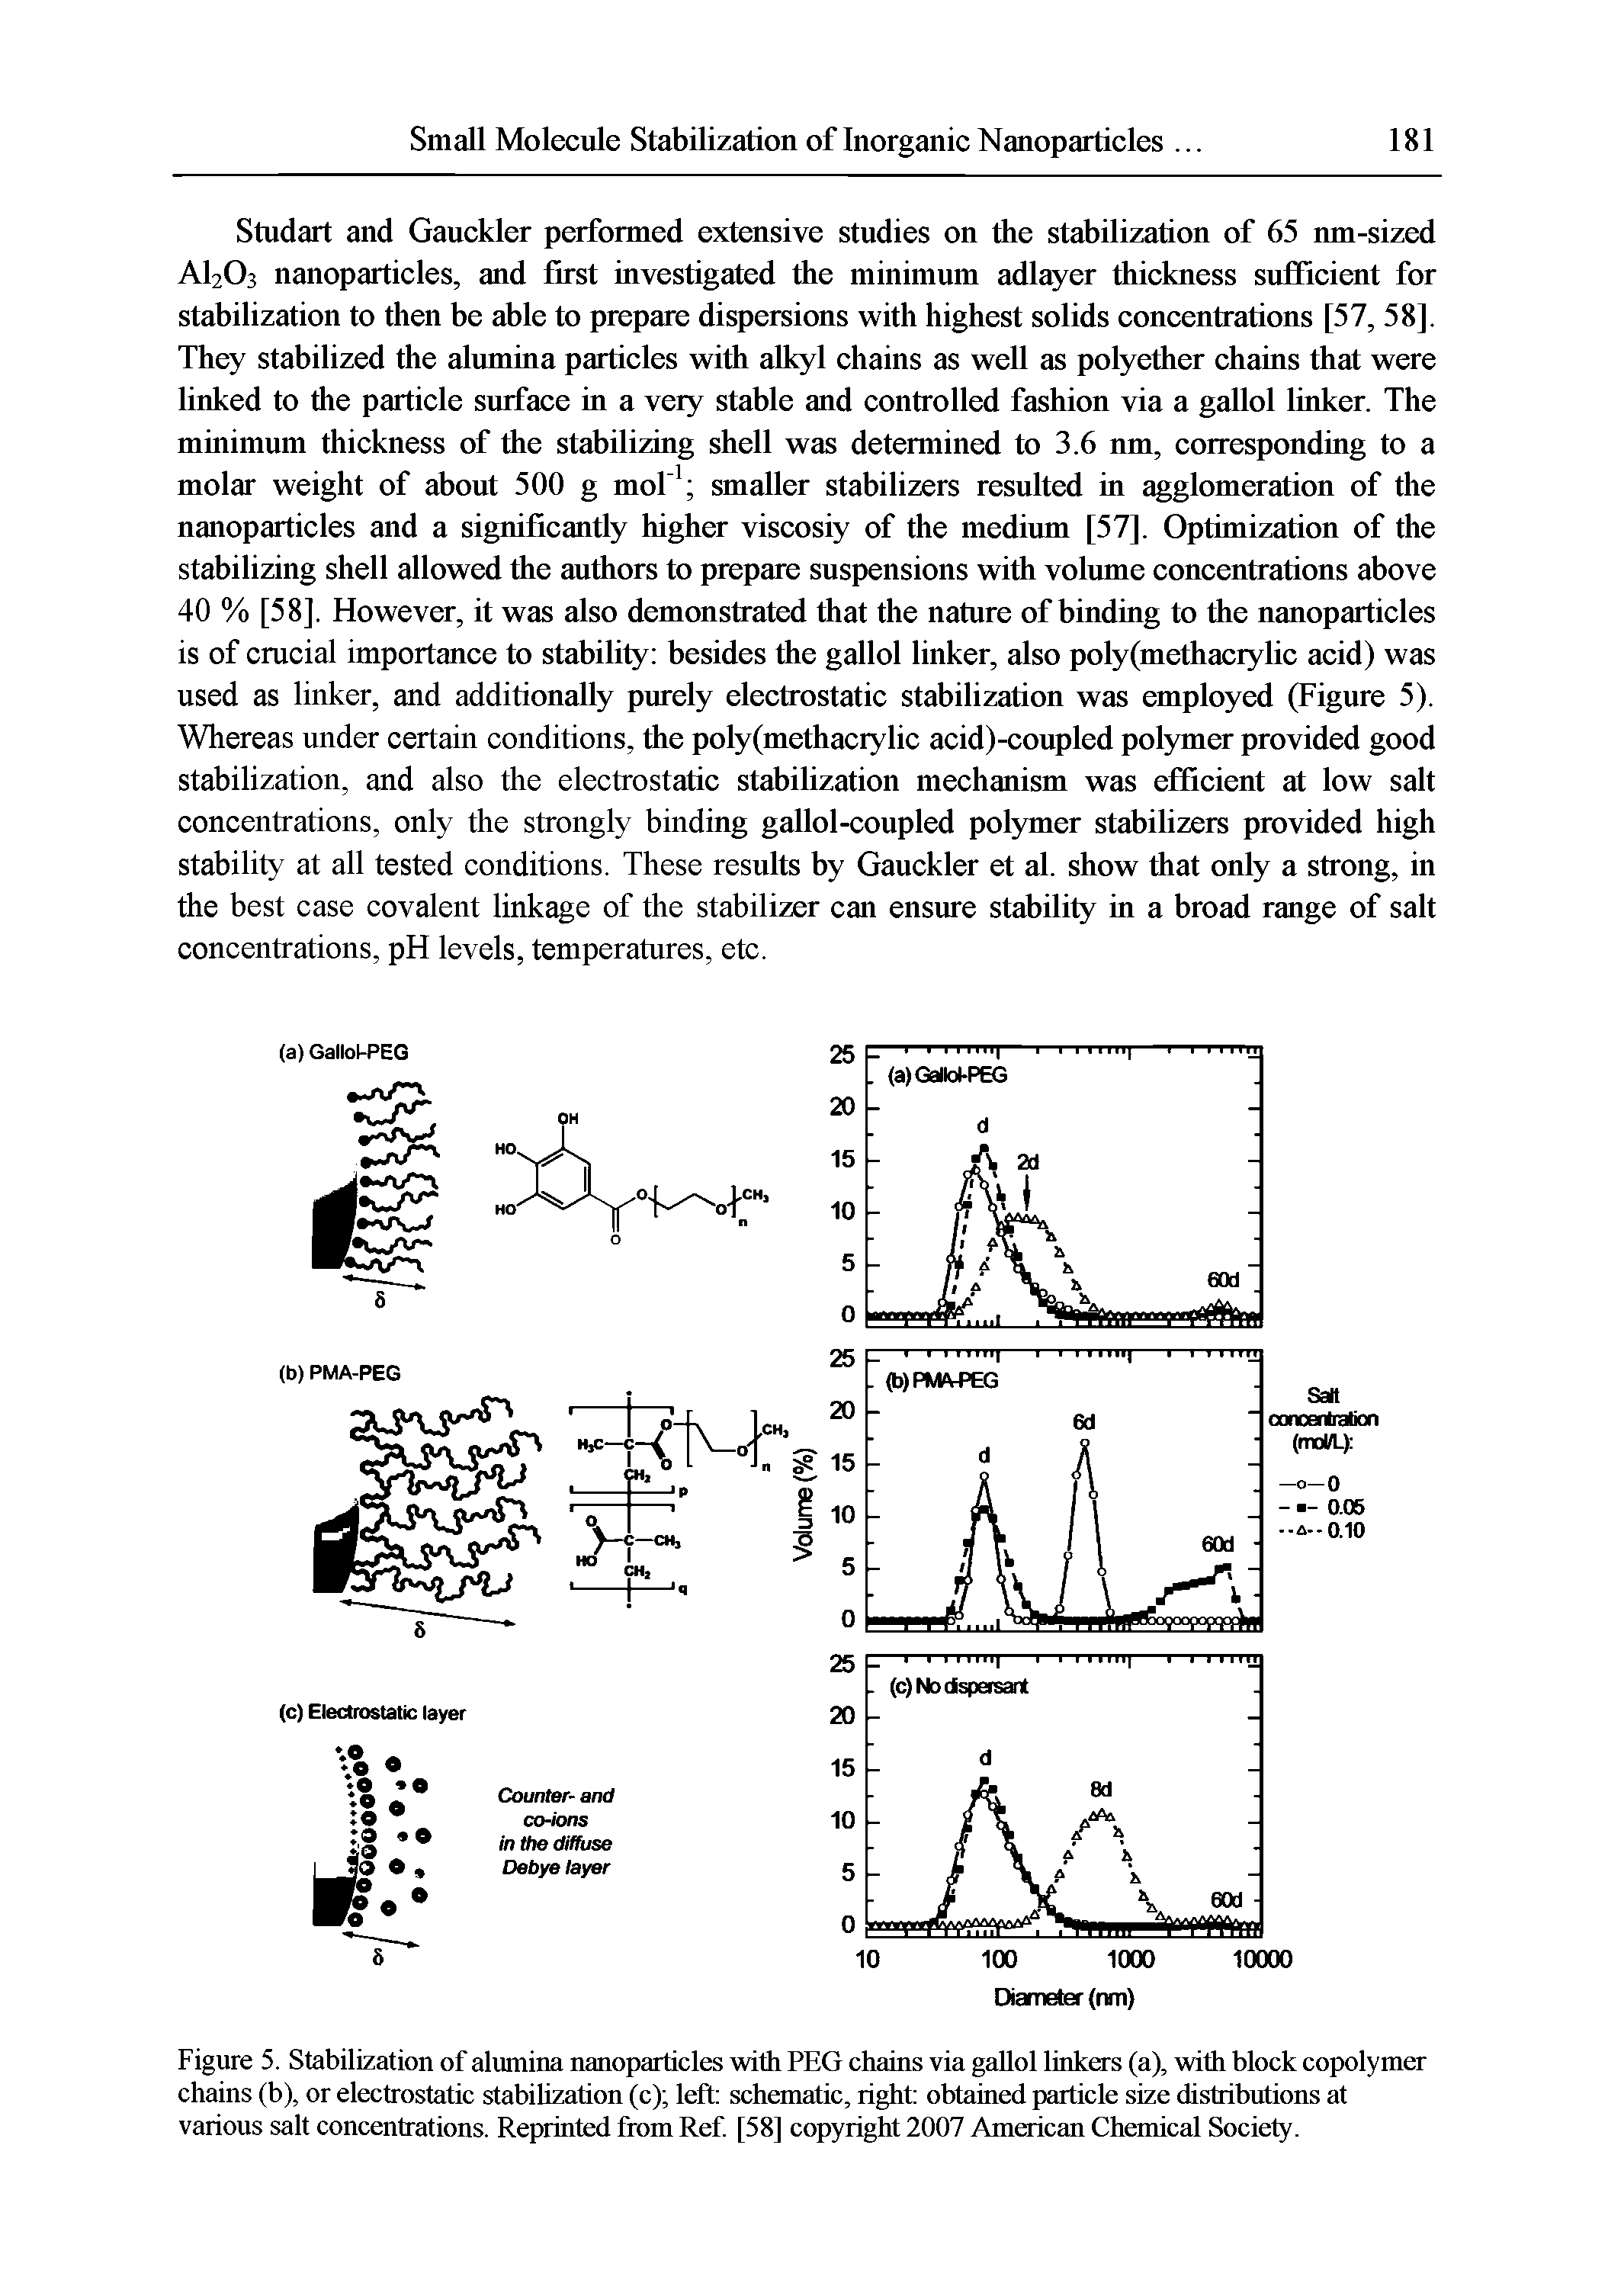 Figure 5. Stabilization of alumina nanoparticles with PEG chains via gaUol linkers (a), with block copolymer chains (b), or electrostatic stabilization (c) left schematic, right obtained particle size distributions at various salt concentrations. Reprinted fiom Ref [58] copyright 2007 American Chemical Society.